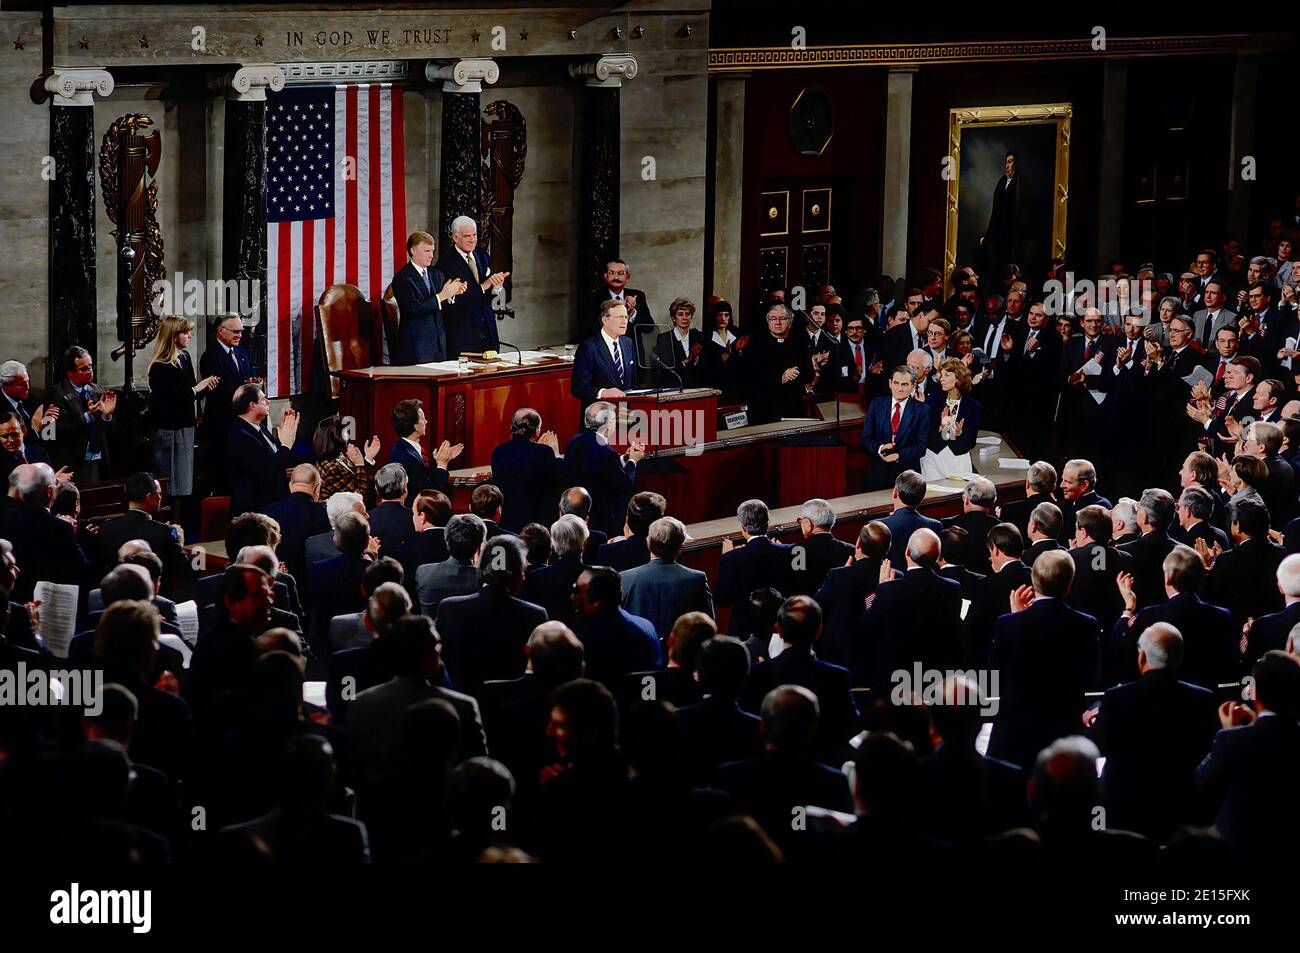 Washington, DC. USA, March 6, 1991 President George H.W. Bush delivers his Address Before a Joint Session of the Congress on the Cessation of the Persian Gulf Conflict, to a standing ovation lead by Vice President Daniel Quayle and Speaker of the House Tom Foley Stock Photo